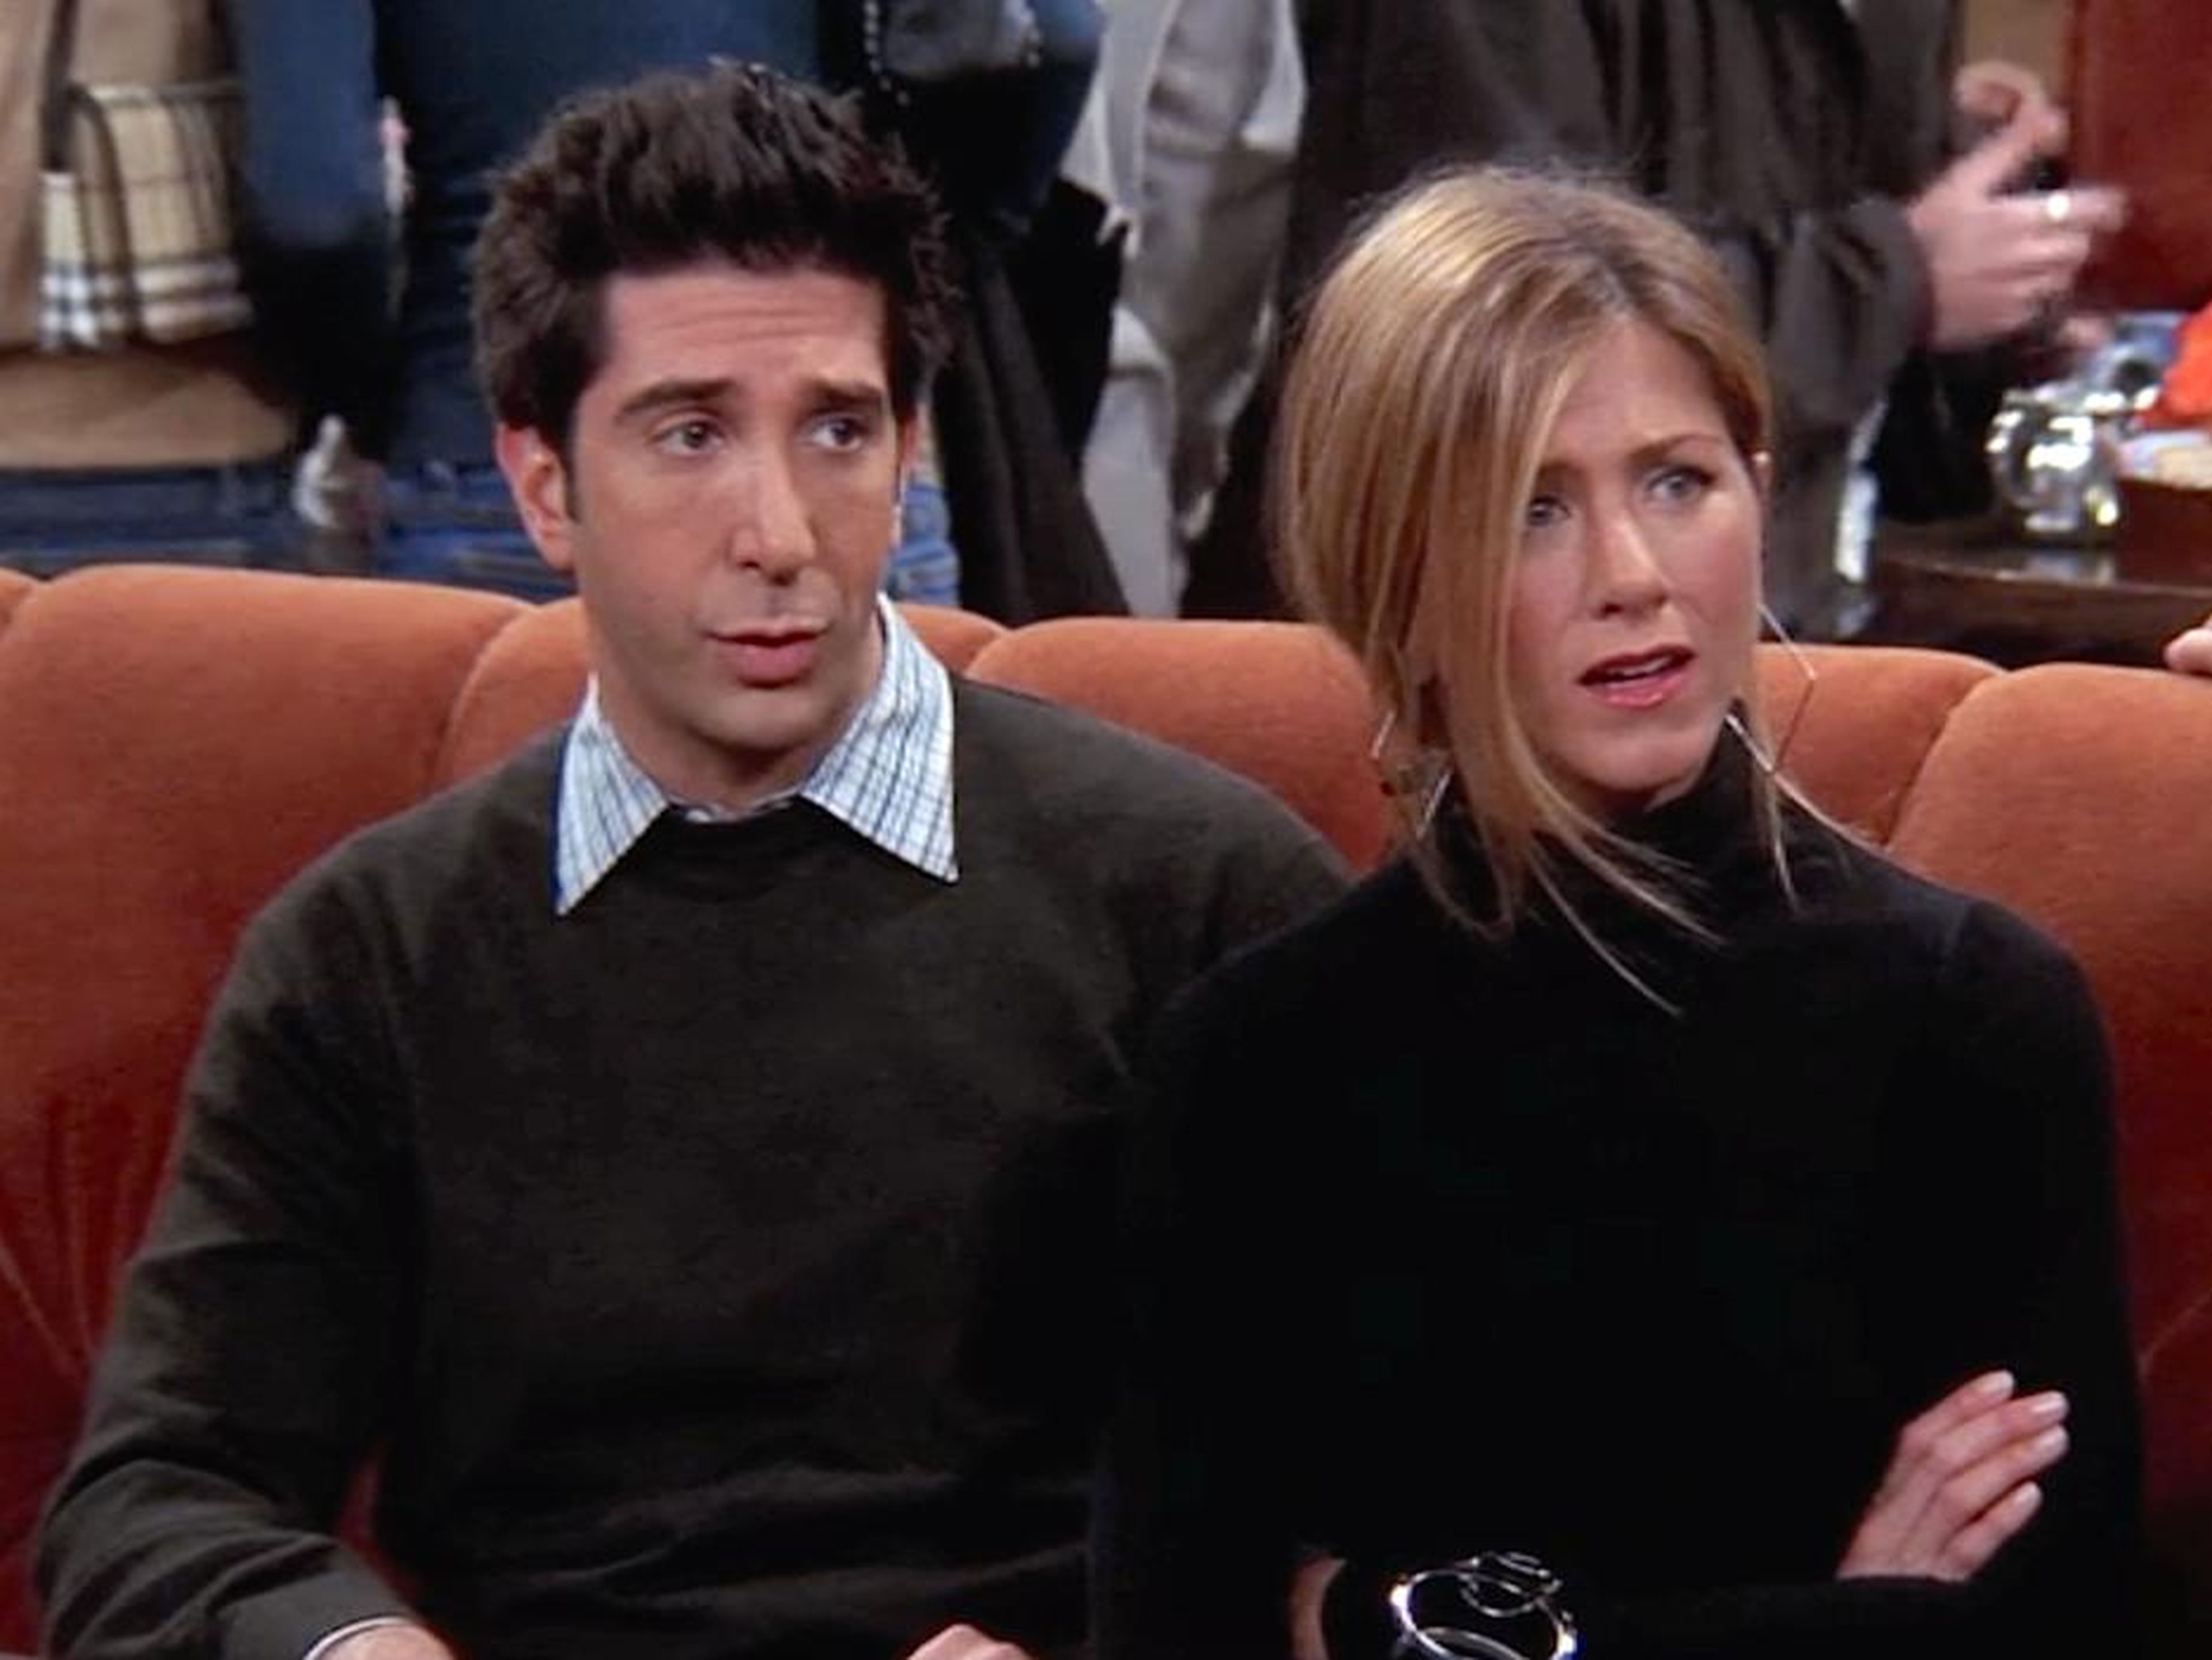 Ross and Rachel weren't clear about their expectations when they took a break from their relationship.